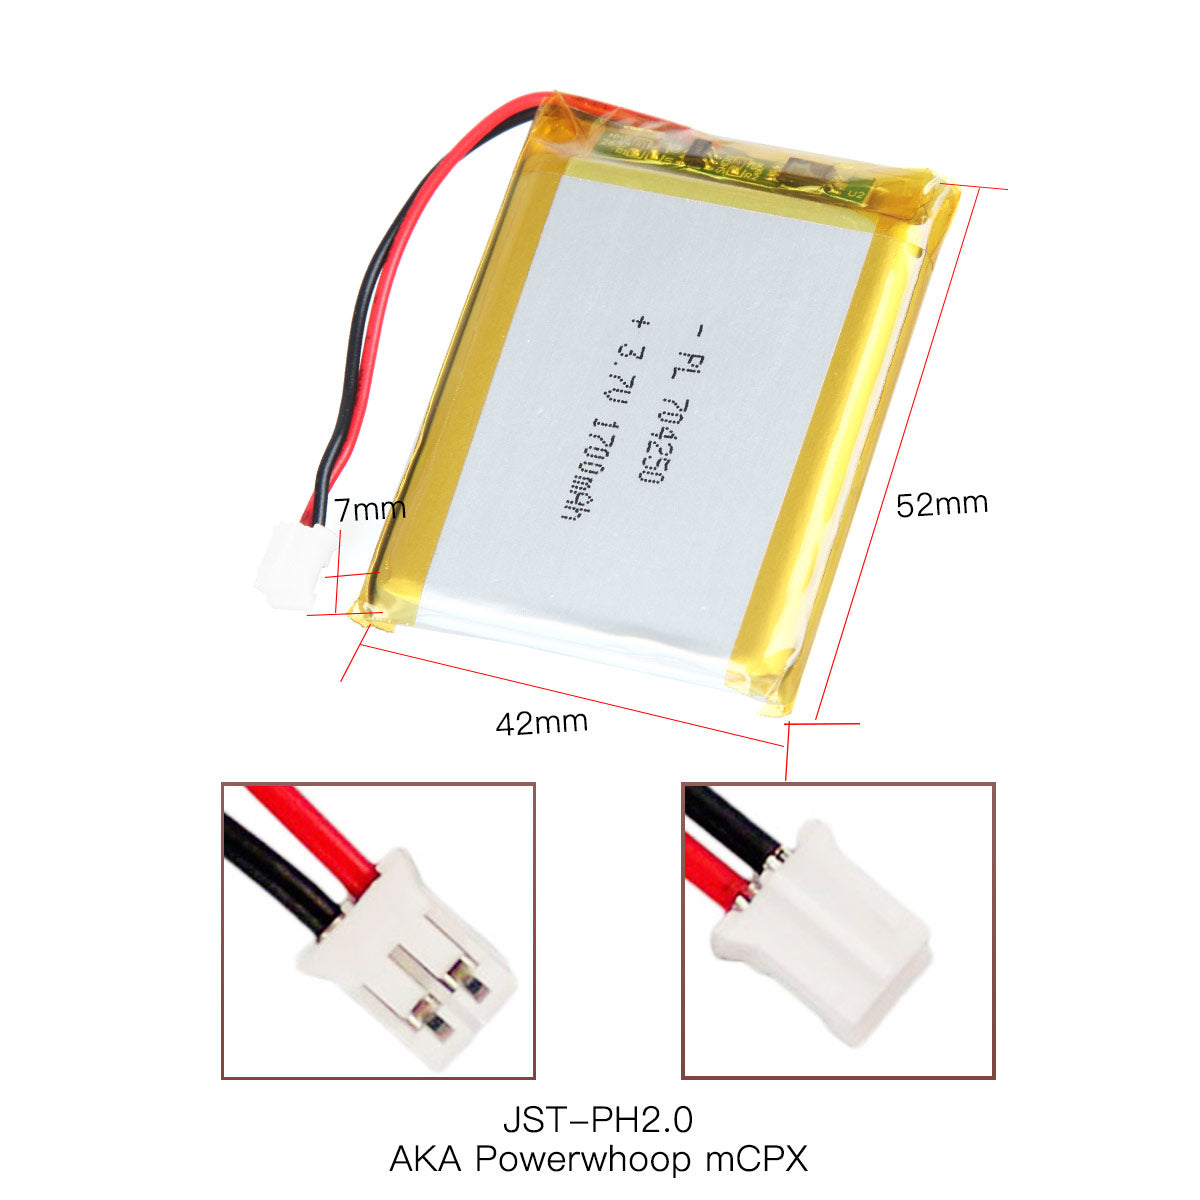 YDL 3.7V 1700mAh 704250 Lithium Polymer Battery Rechargeable Lithium Polymer ion Battery Pack